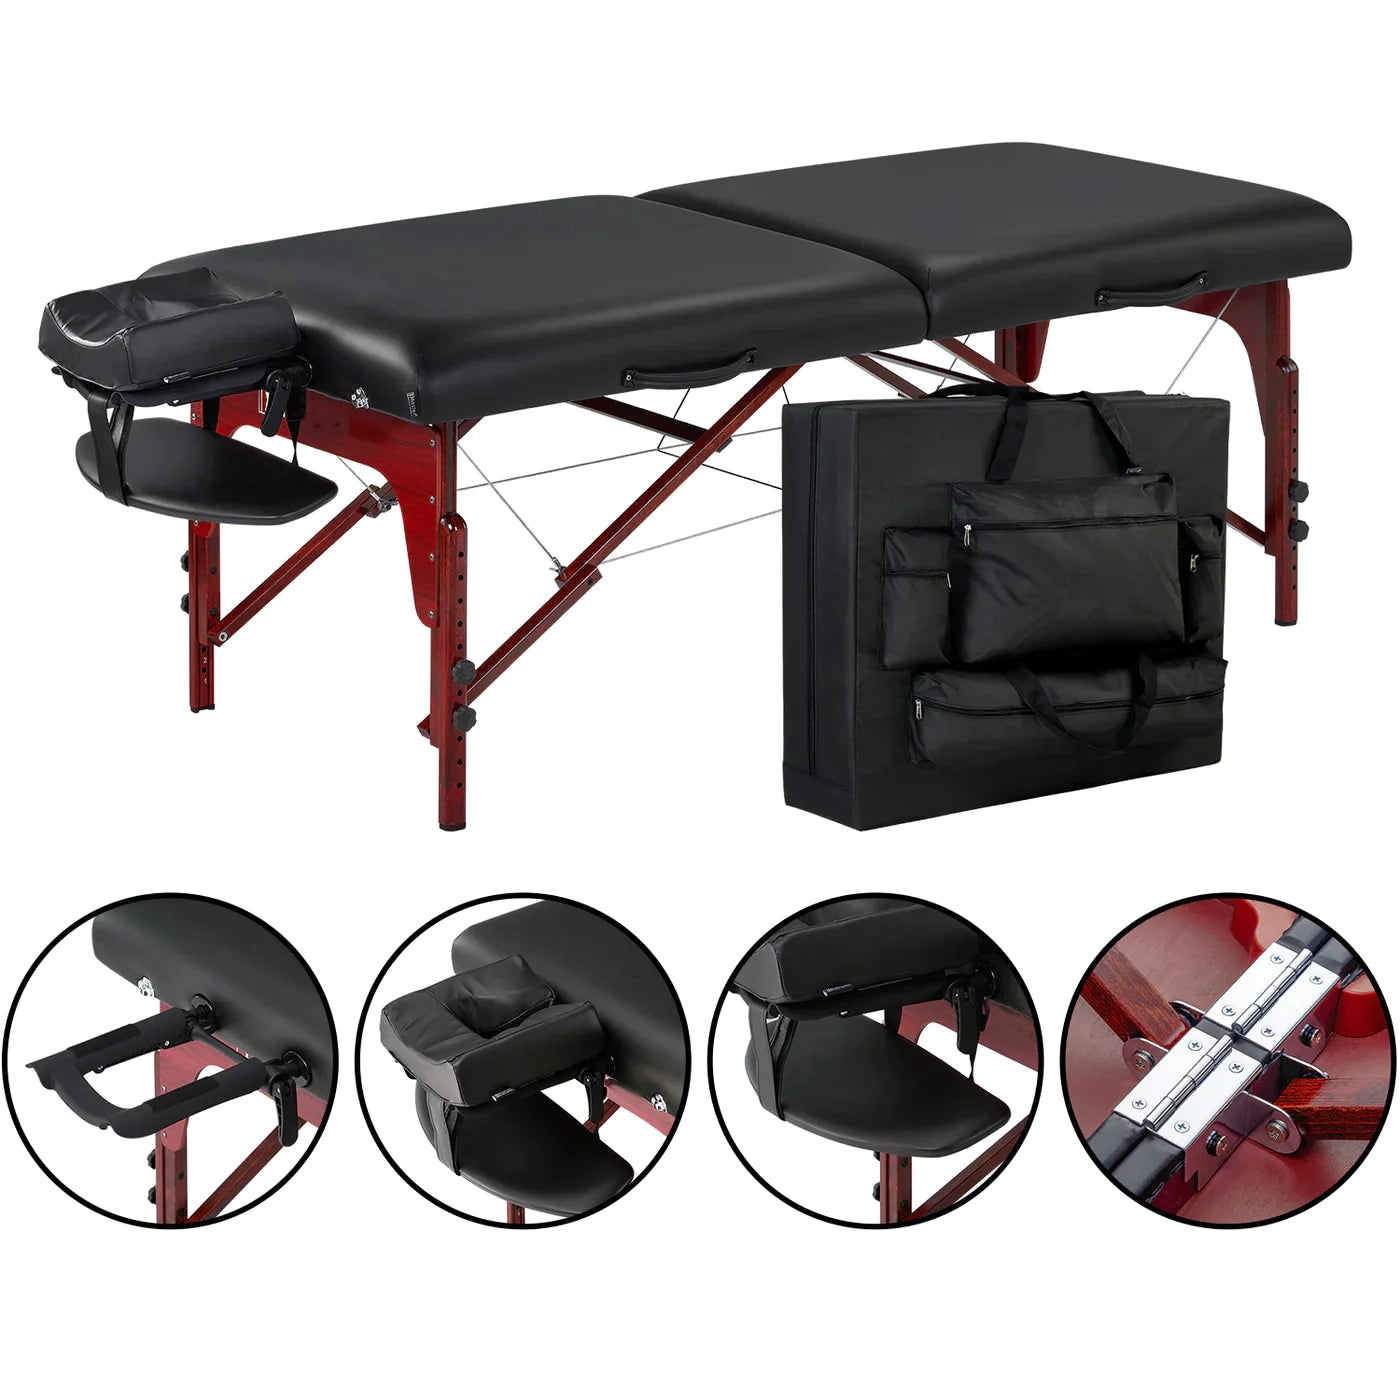 Spabodega 31" Montclair™ Salon Therma-Top® - Ultimate Massage Table and Package, Has All the Bells & Whistles! (Black Color)